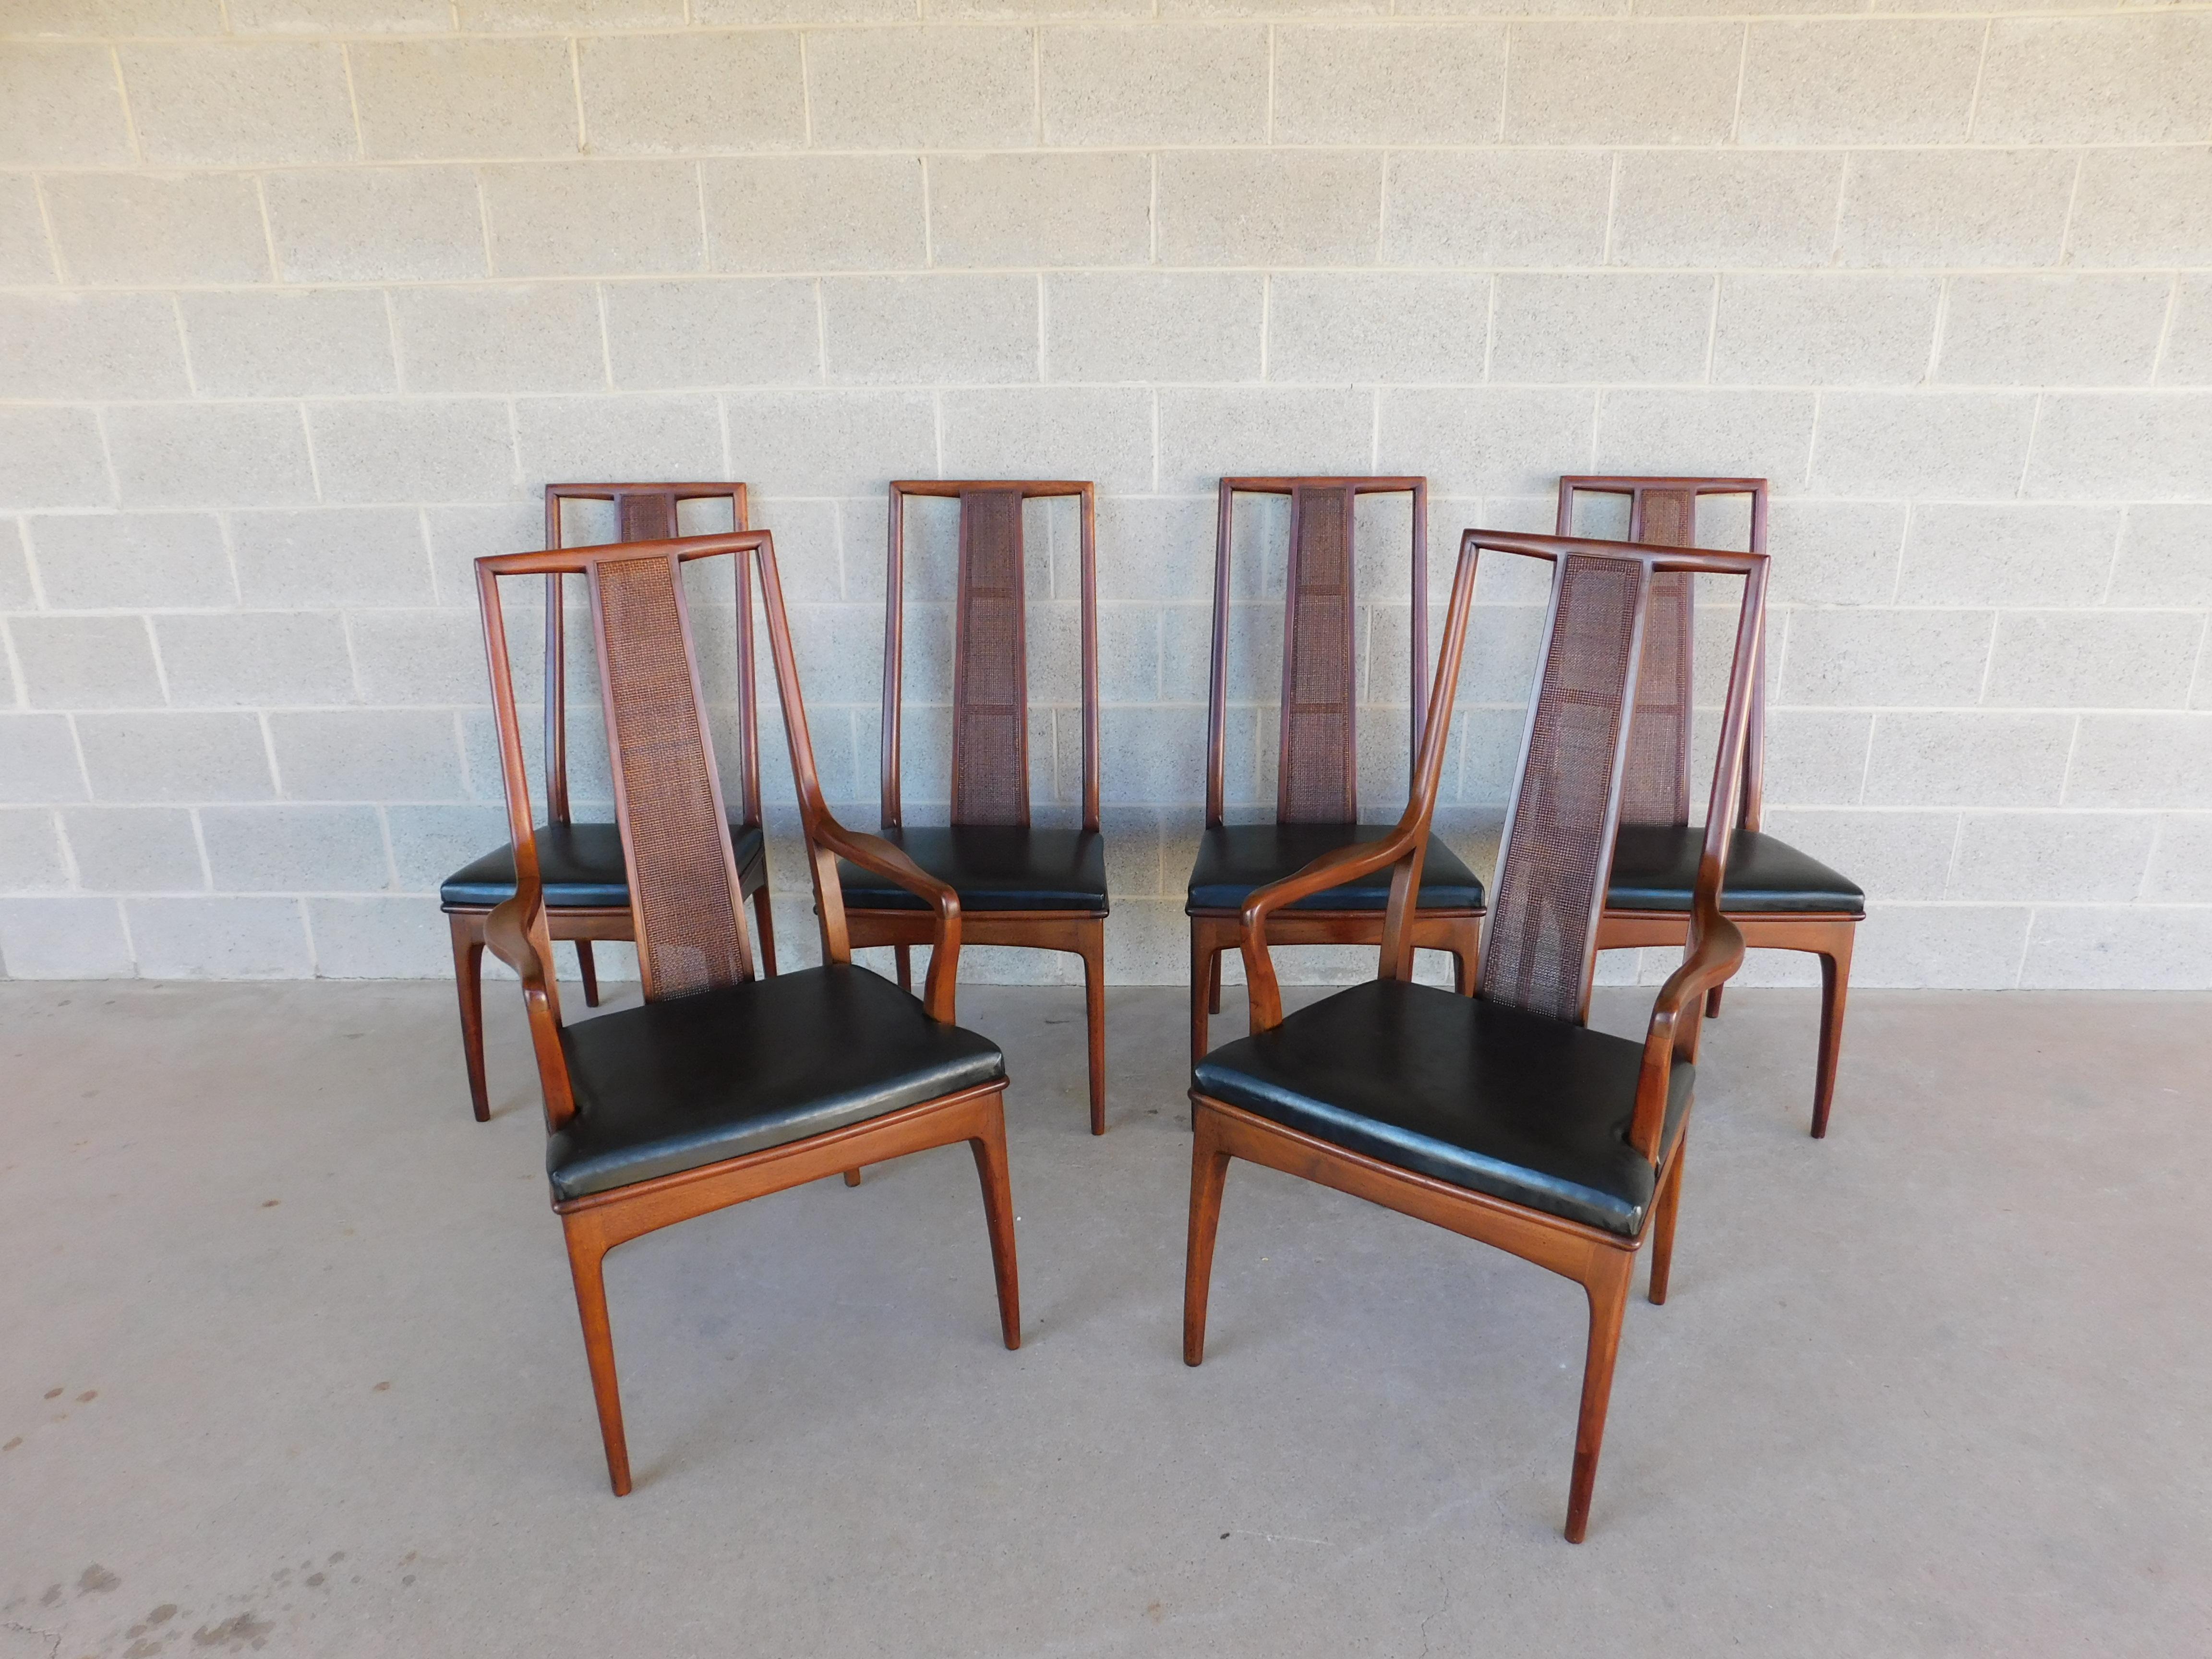 Mount Airy Chair Co. Mid Century John Stuart Walnut Dining Chairs - Set of 6

Set of 6 Walnut Chairs, Original Finish, Contoured Back Design with Center Tight Caning, Original Vinyl Black Seat Cushion in Very Good Original Condition. 4 side and 2